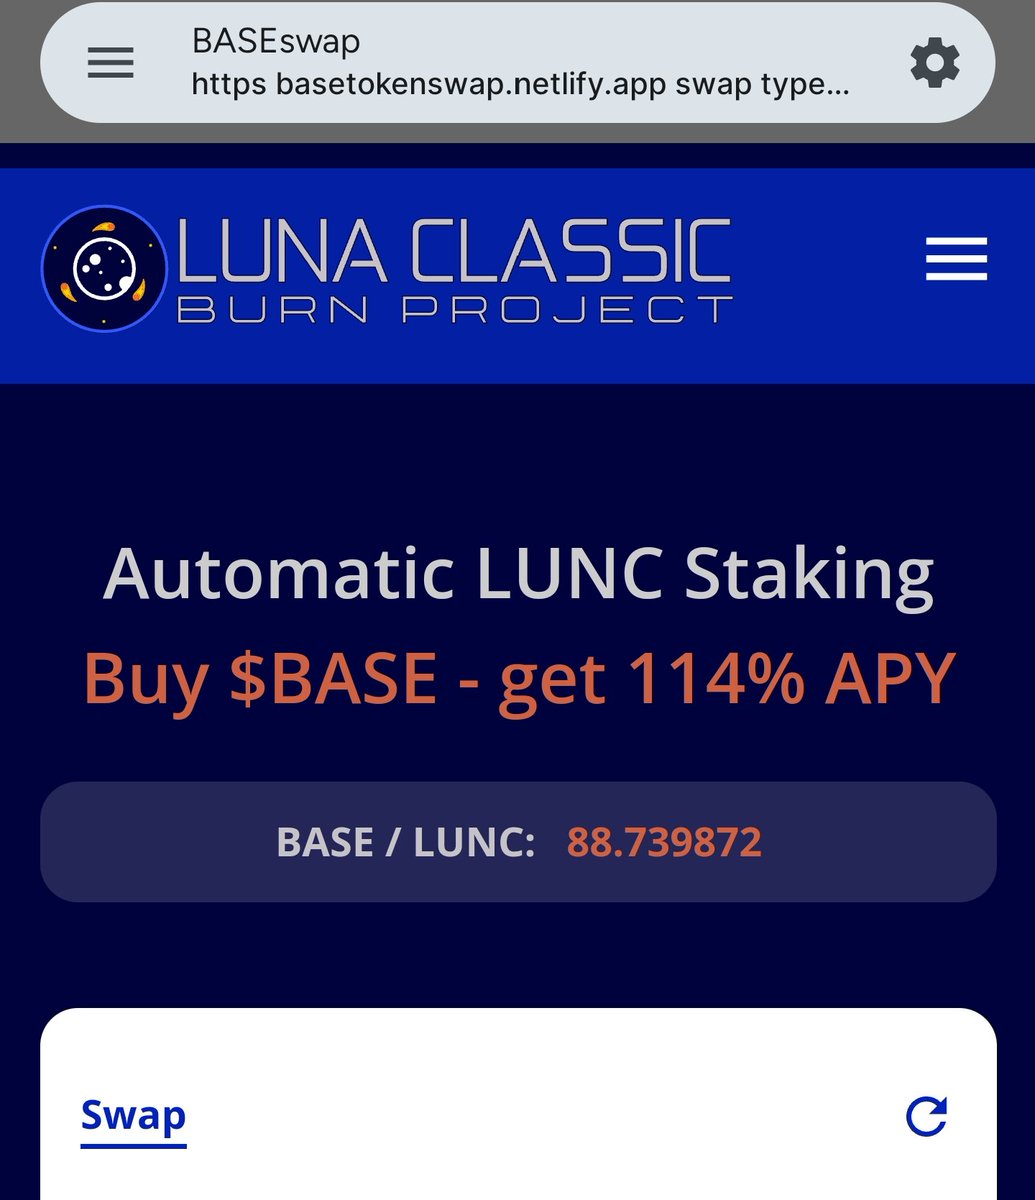 To make it even more clear that it is a 1 step process, I've changed the text at the top of the dApp.

#LBUN #BASE #altcoin #LUNCcommunity #mining #LuncBurn #LuncArmy #LUNCpenguins #Crypto #Binance #Terra
@davidagoebelt